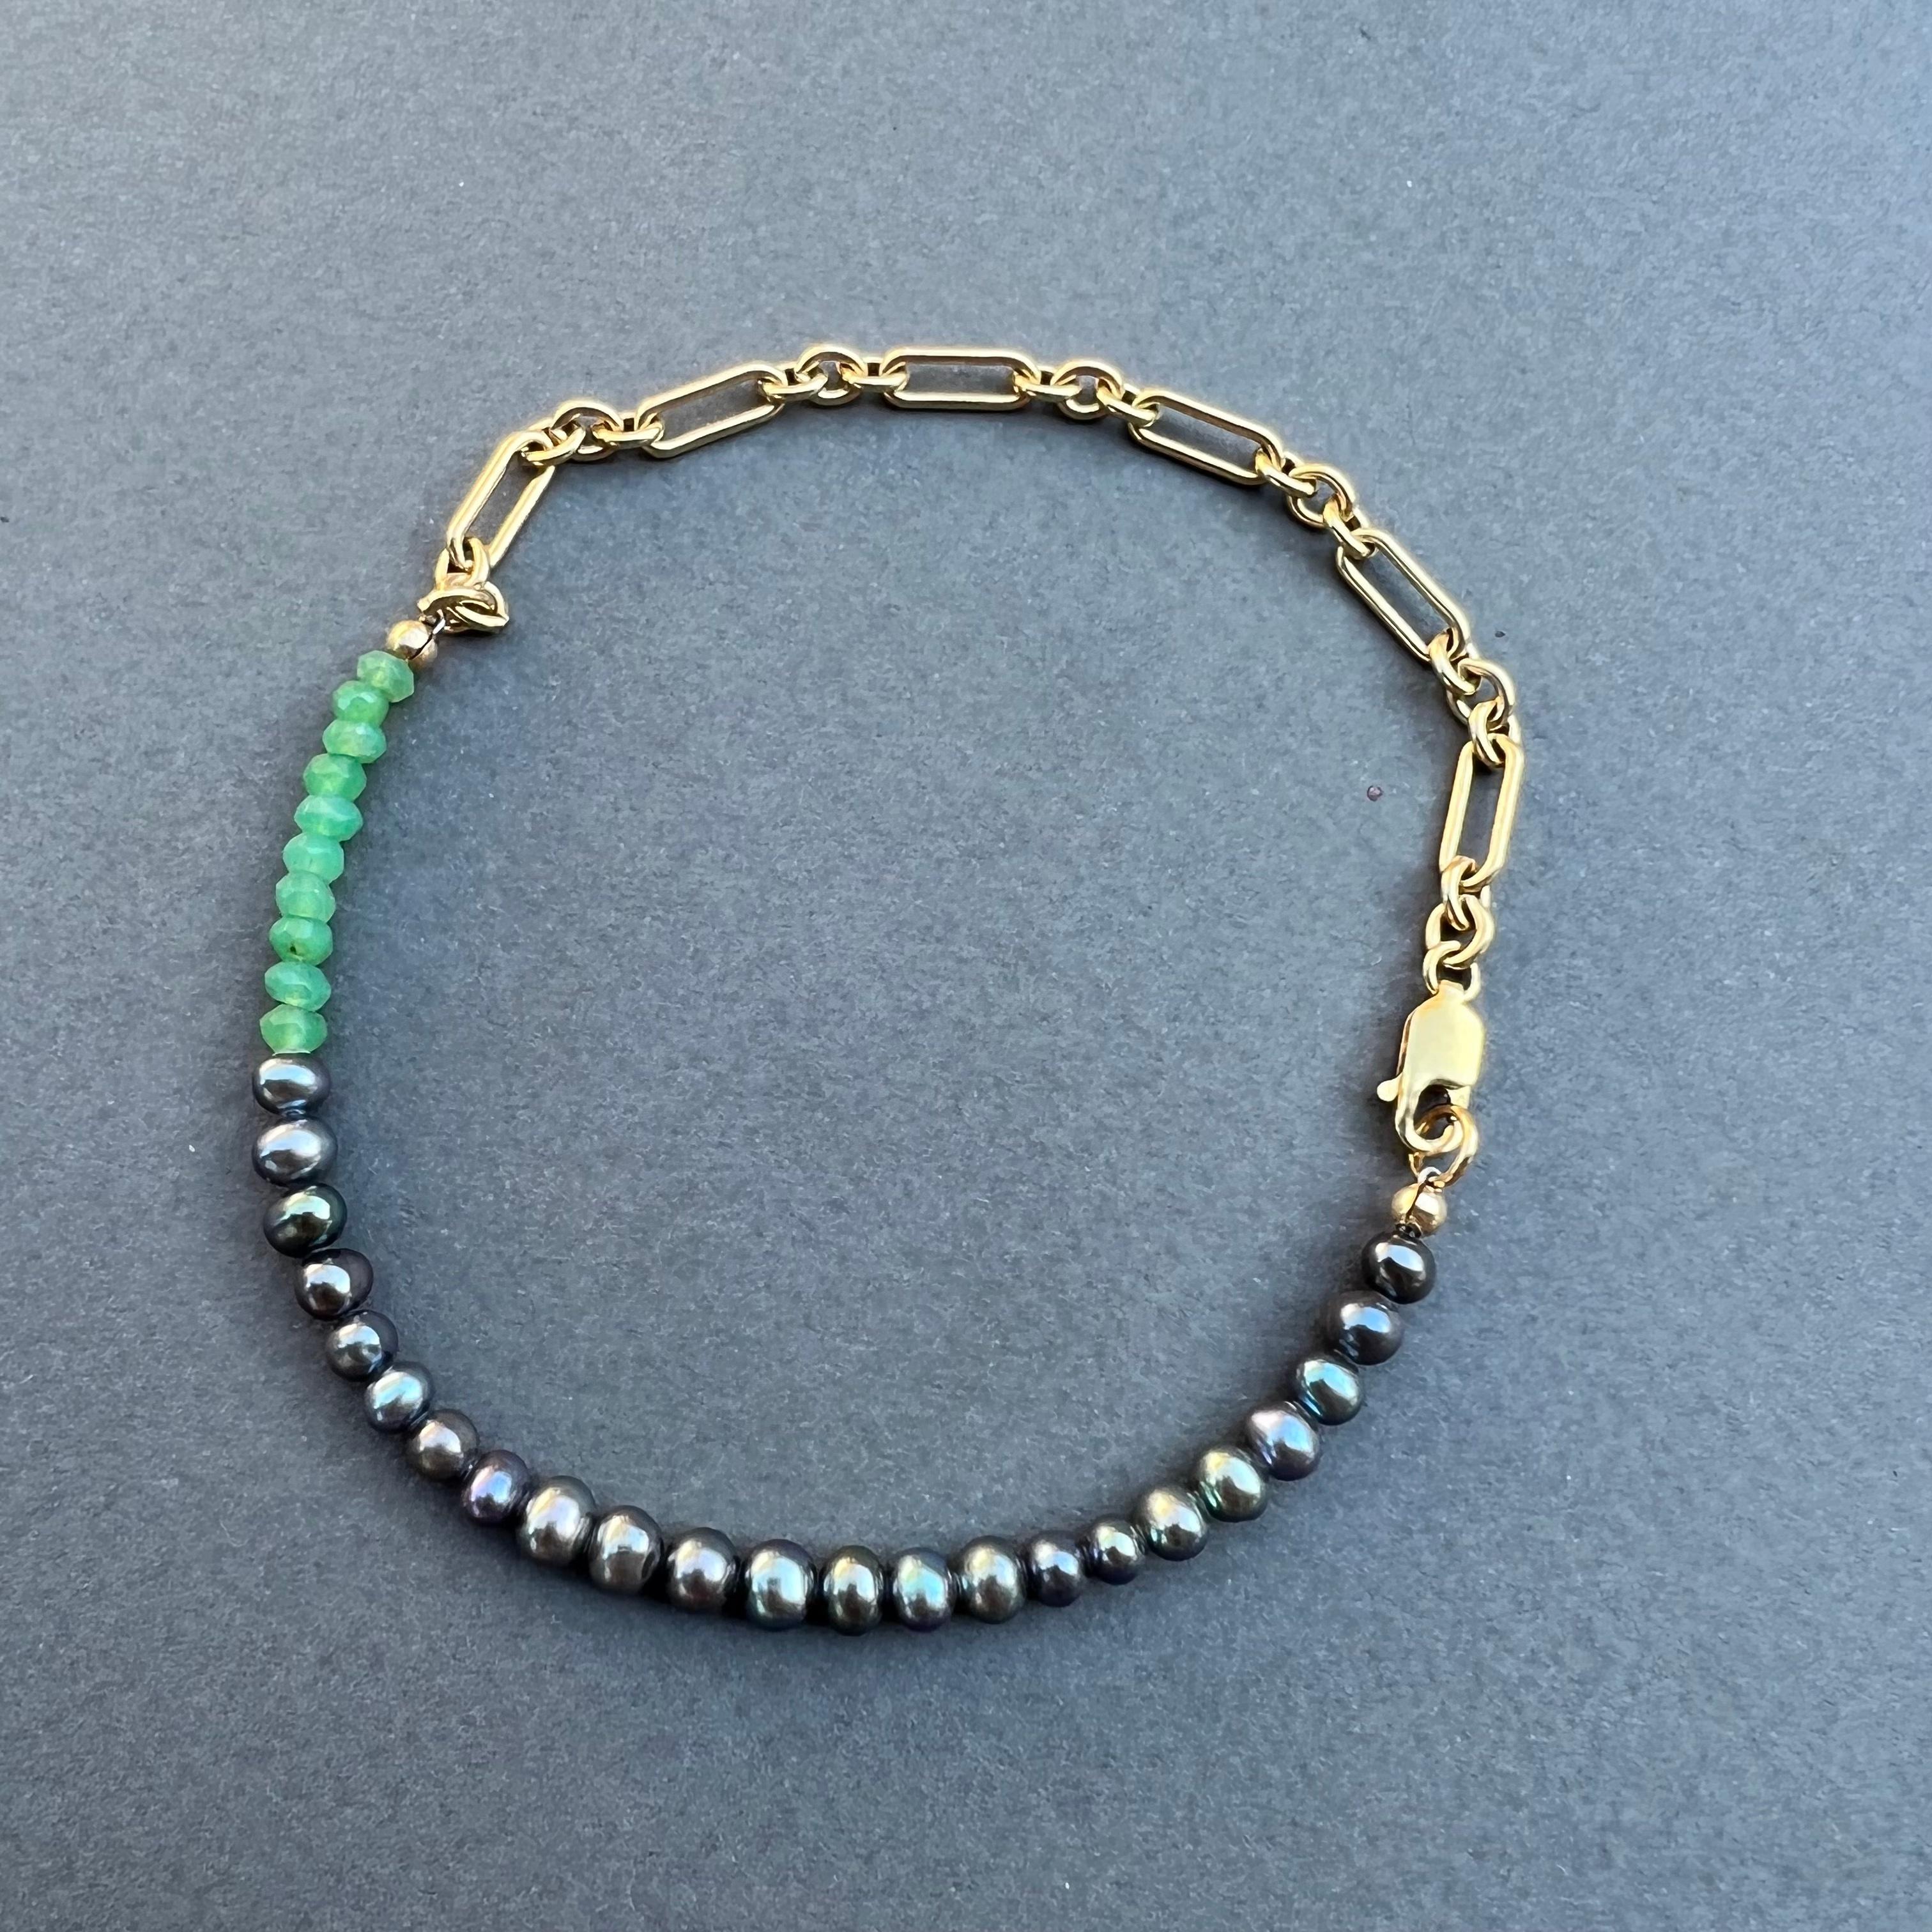 Black Pearl Ankle Bracelet Gold Filled Chain Chrysoprase J Dauphin For Sale 2